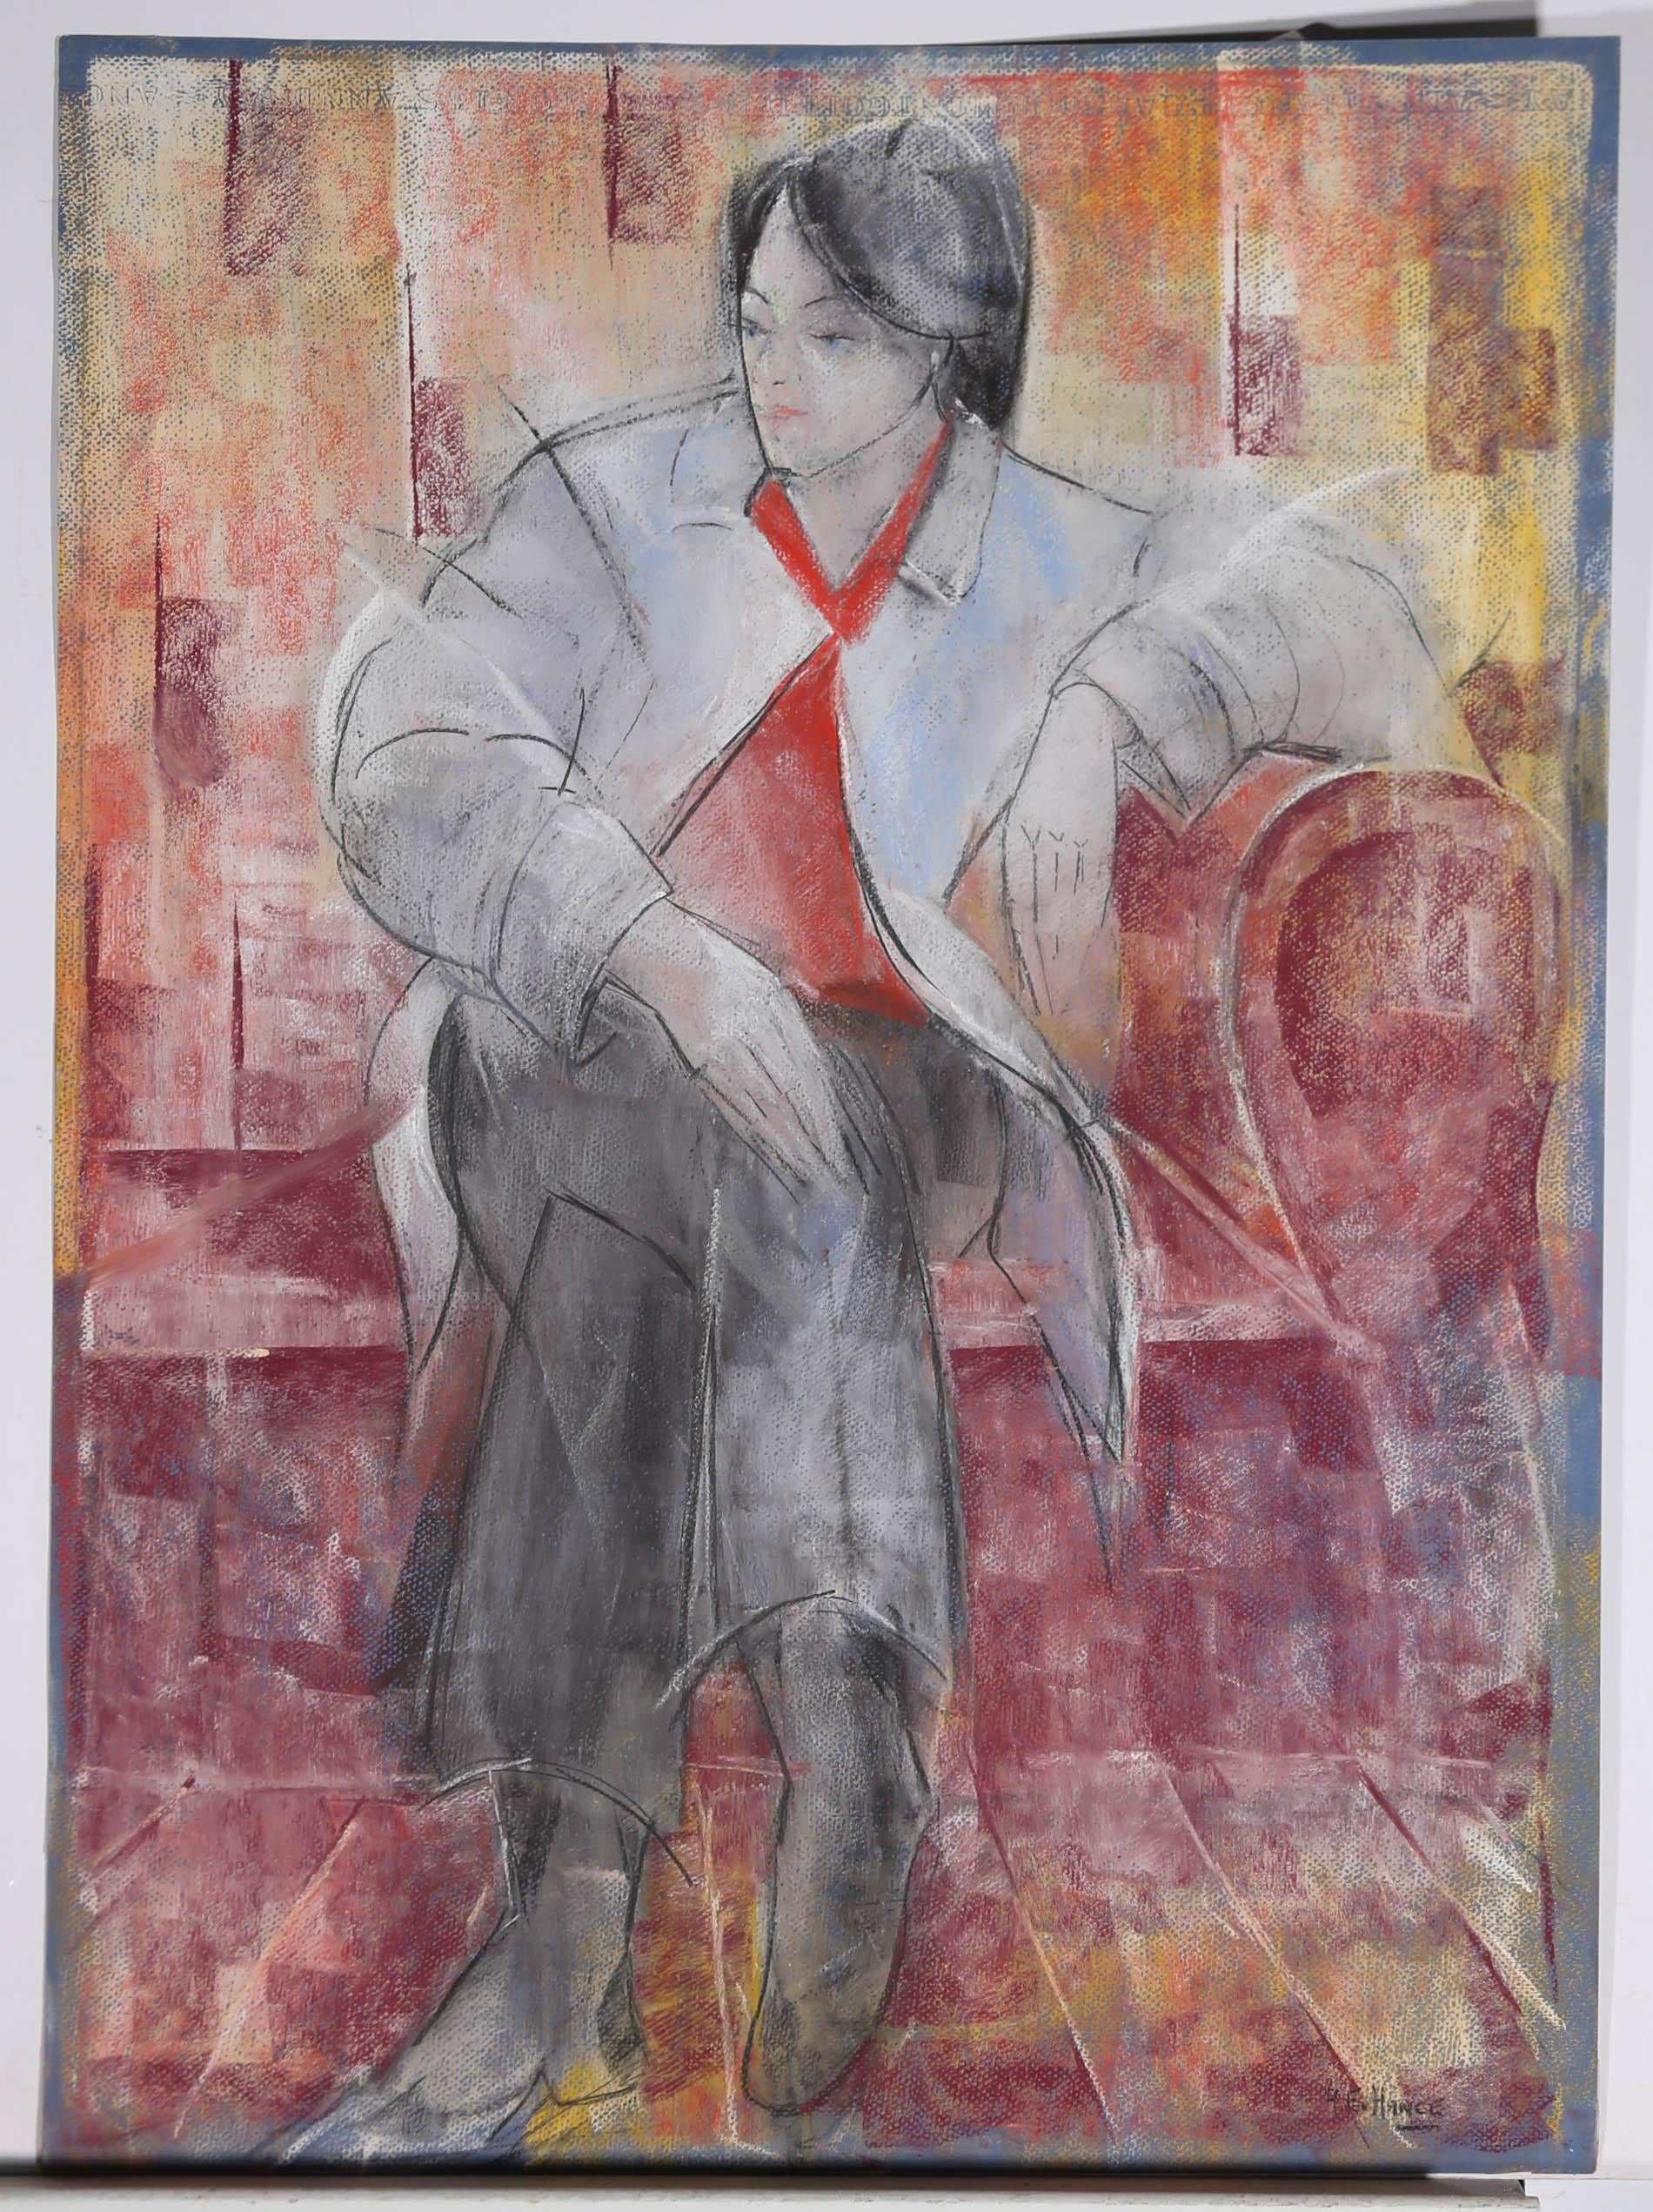 A fine modernist pastel portrait showing a stylish woman in a white coat and red shirt. The artist has signed to the lower right corner. There is a second pastel drawing on the reverse of a rooster and sparrow. On pastel paper.
